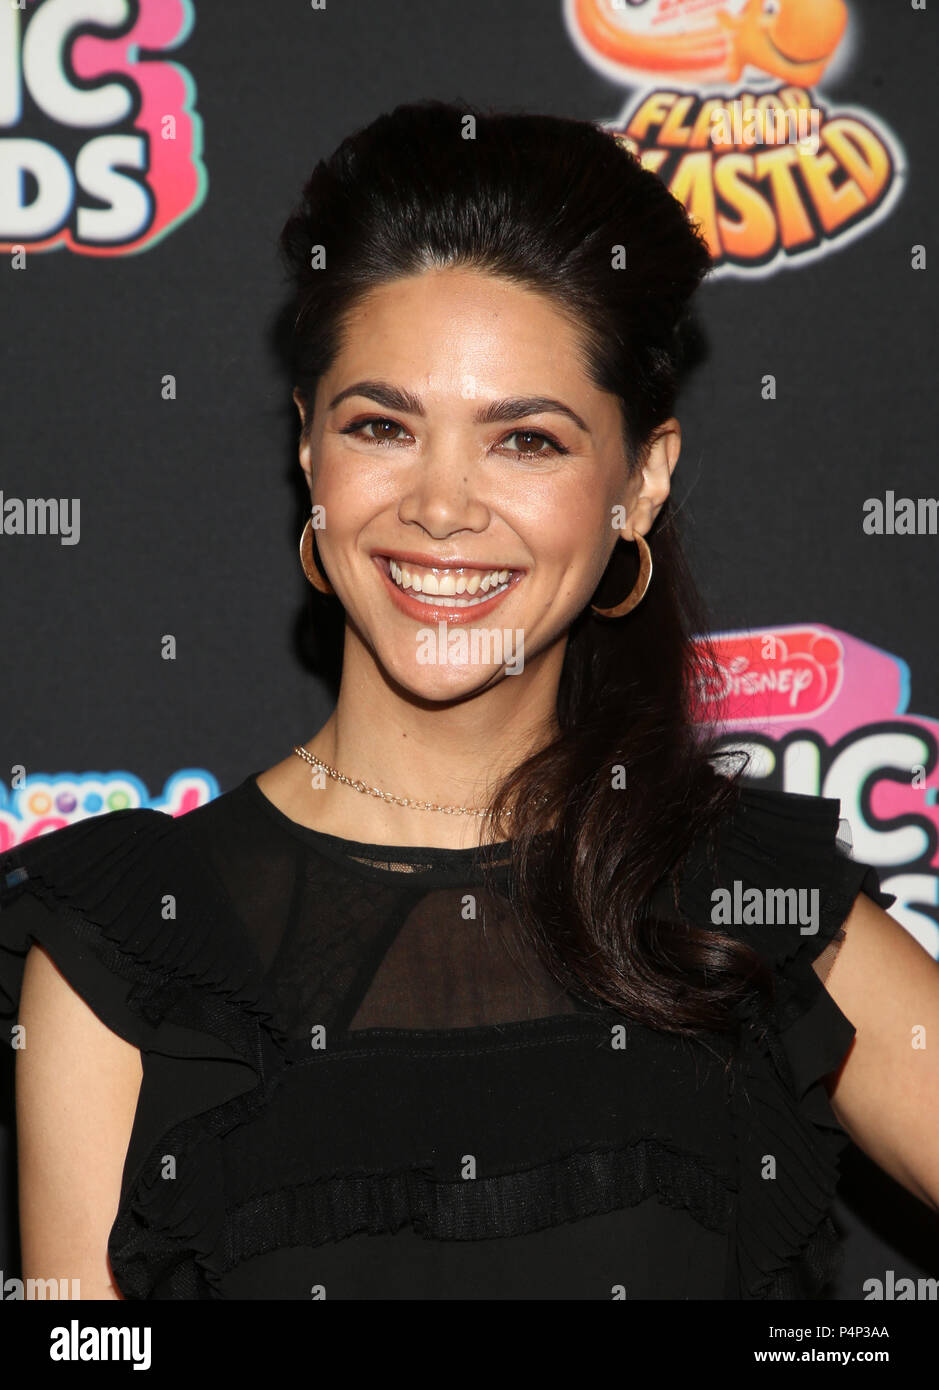 HOLLYWOOD, CA - JUNE 22: Lilan Bowden, at the 2018 Radio Disney Music Awards at the Dolby Theatre in Hollywood, California on June 22, 2018. Credit: Faye Sadou/MediaPunch Stock Photo